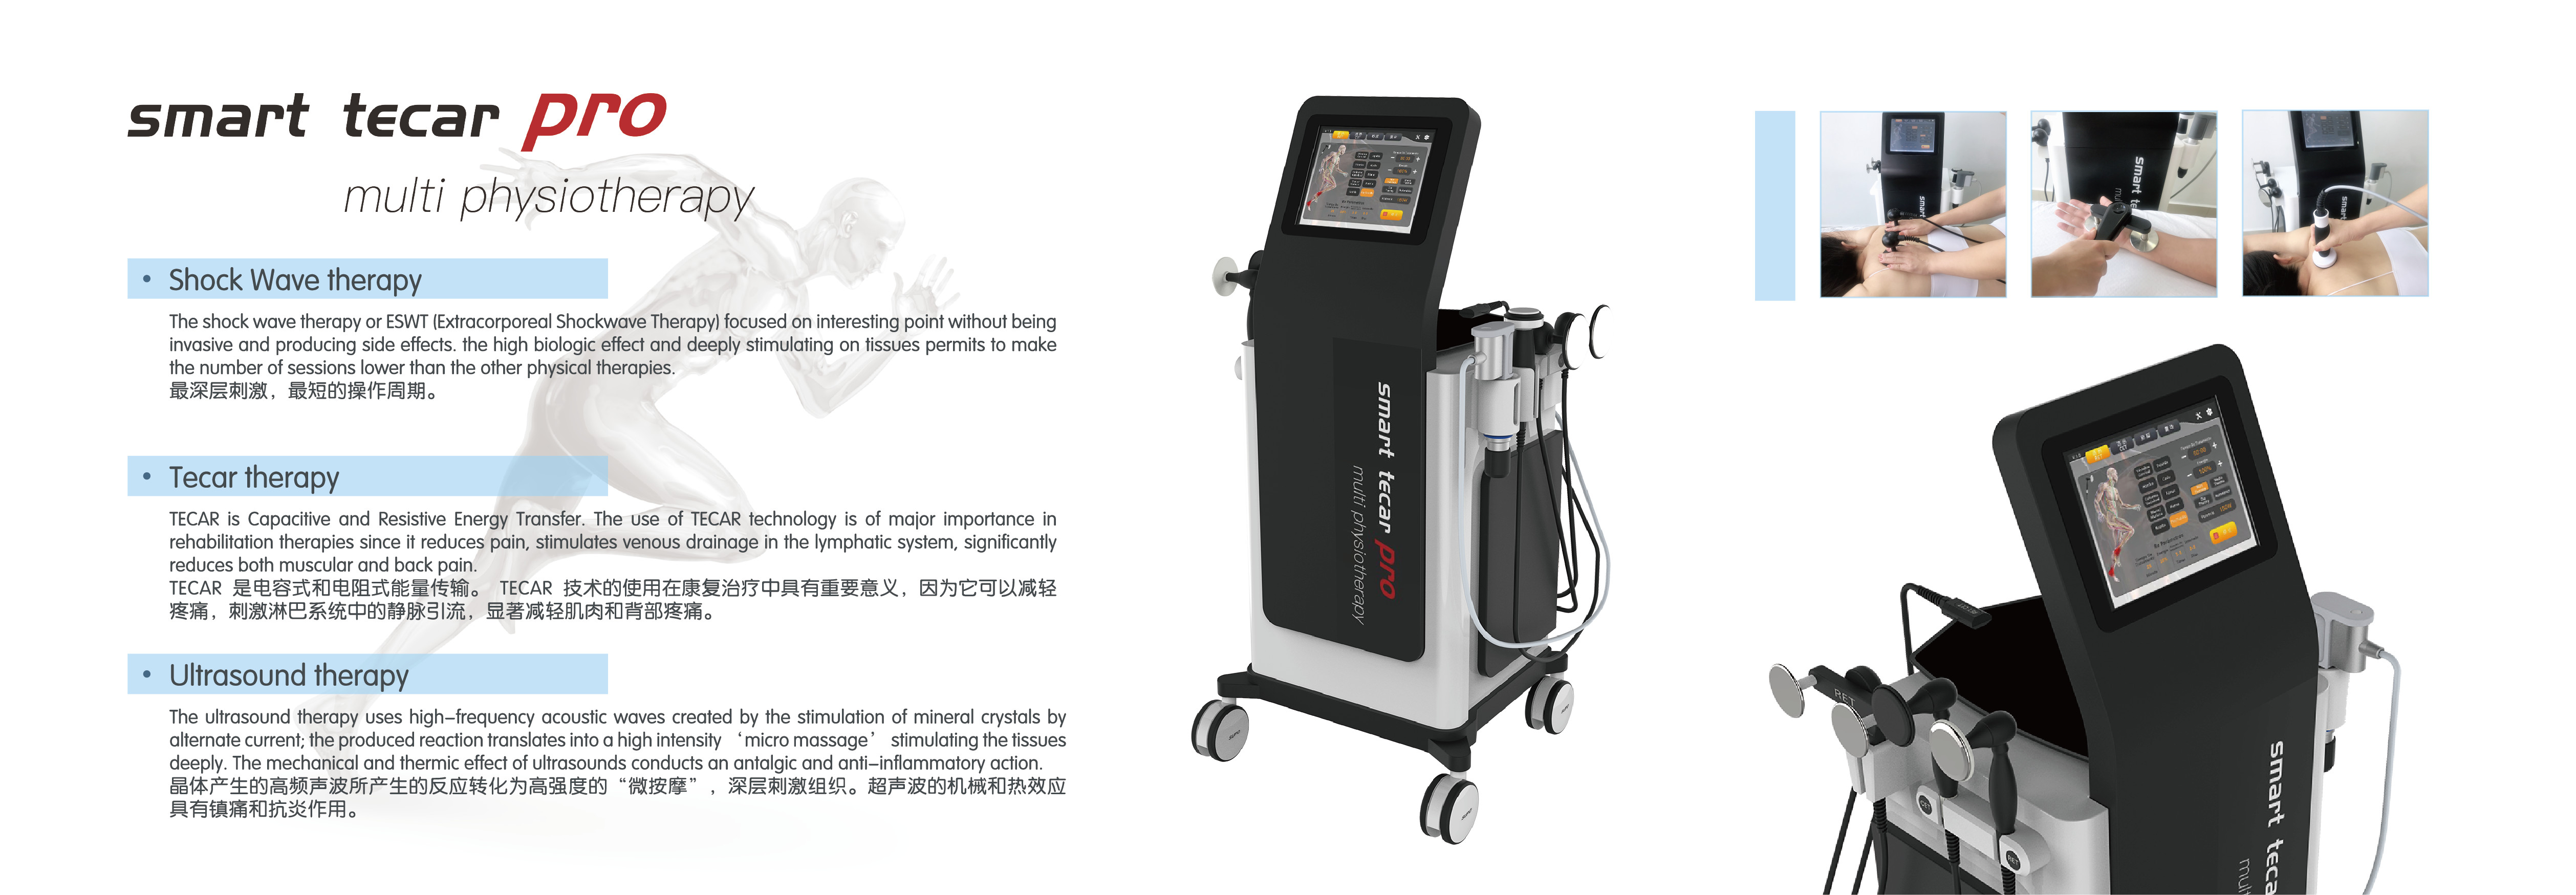 Tecar Therapy Microwave Diathermy Equipment For body Massage Pain Relief/Shockwave Therapy